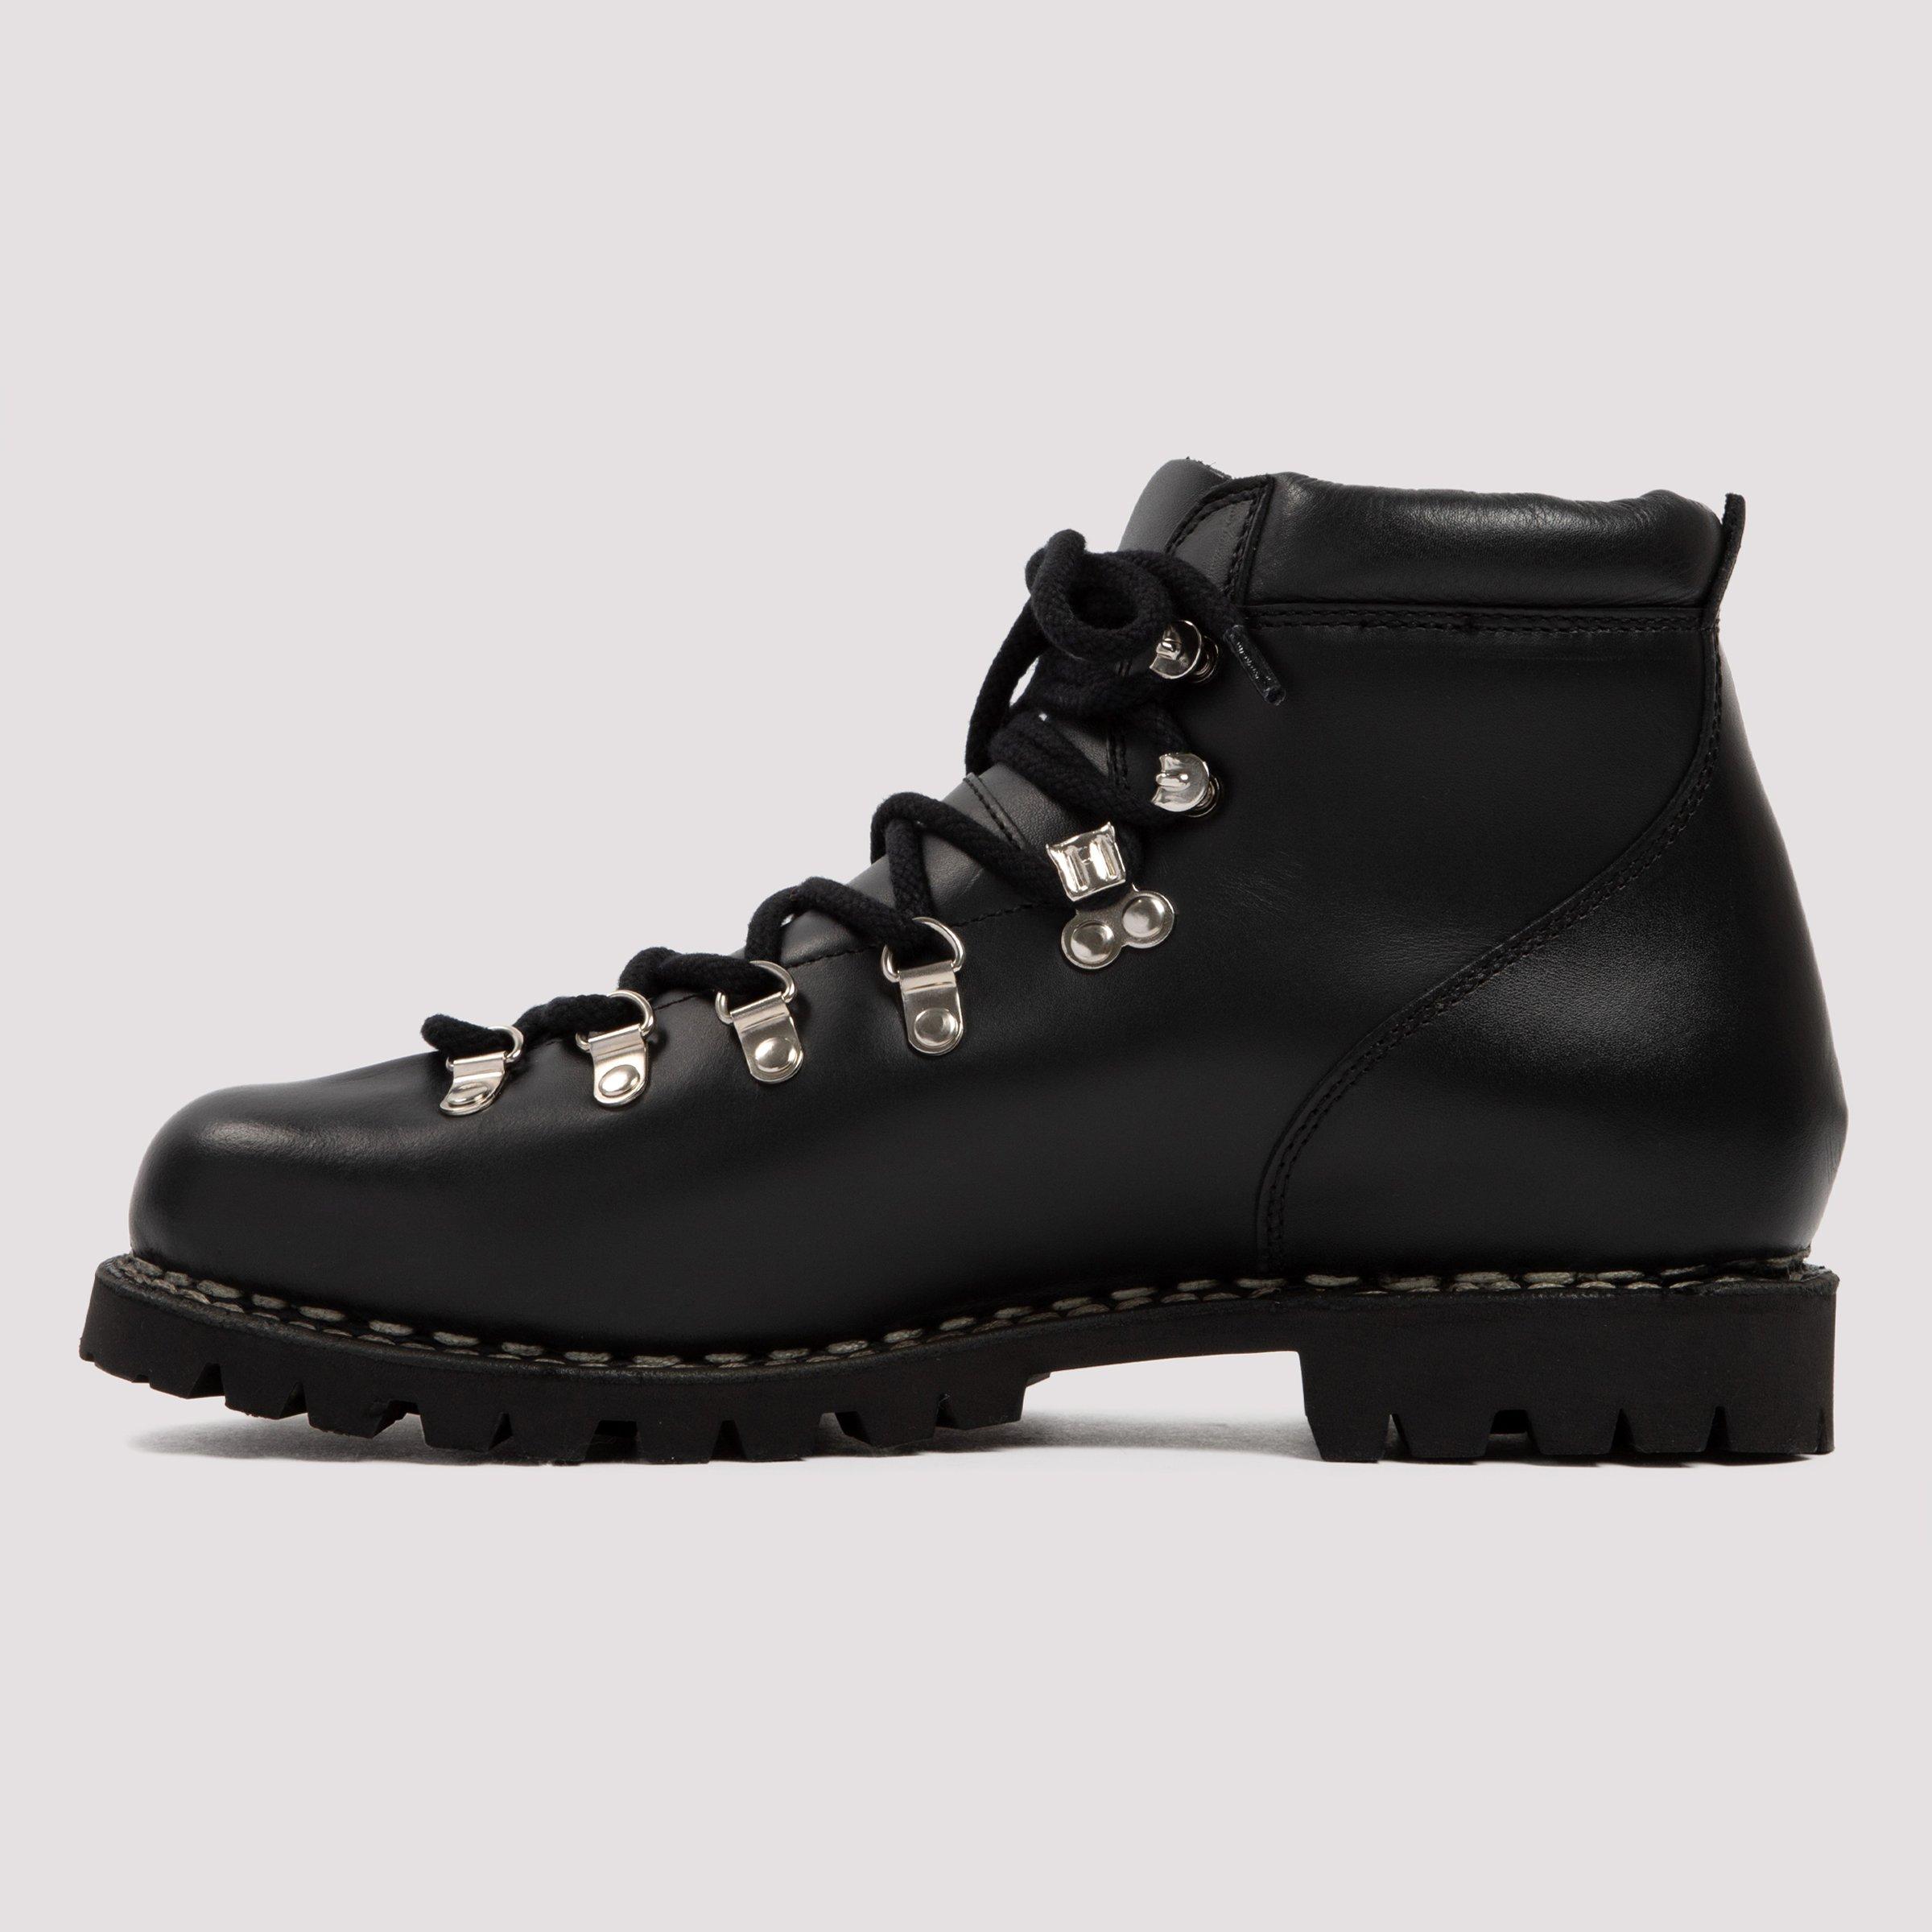 Paraboot Leather Avoriaz Boots in Black for Men - Lyst